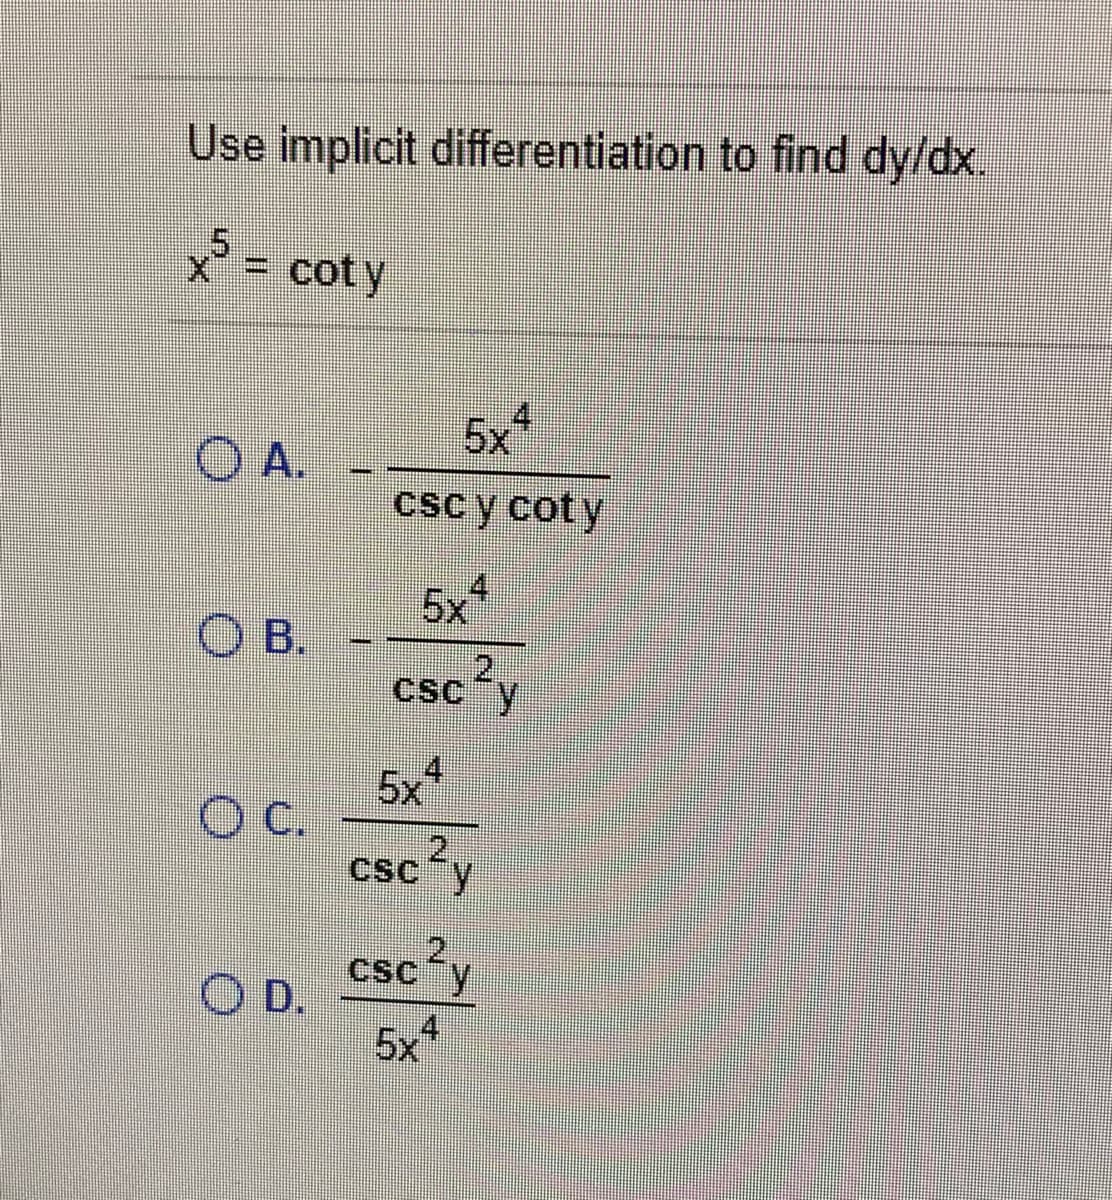 Use implicit differentiation to find dy/dx.
X = coty
5x
O A.
csc y cot y
4.
5x
B.
csc'y
5x"
C.
2)
CSC
c²y
csc²y
D.
5x
14
